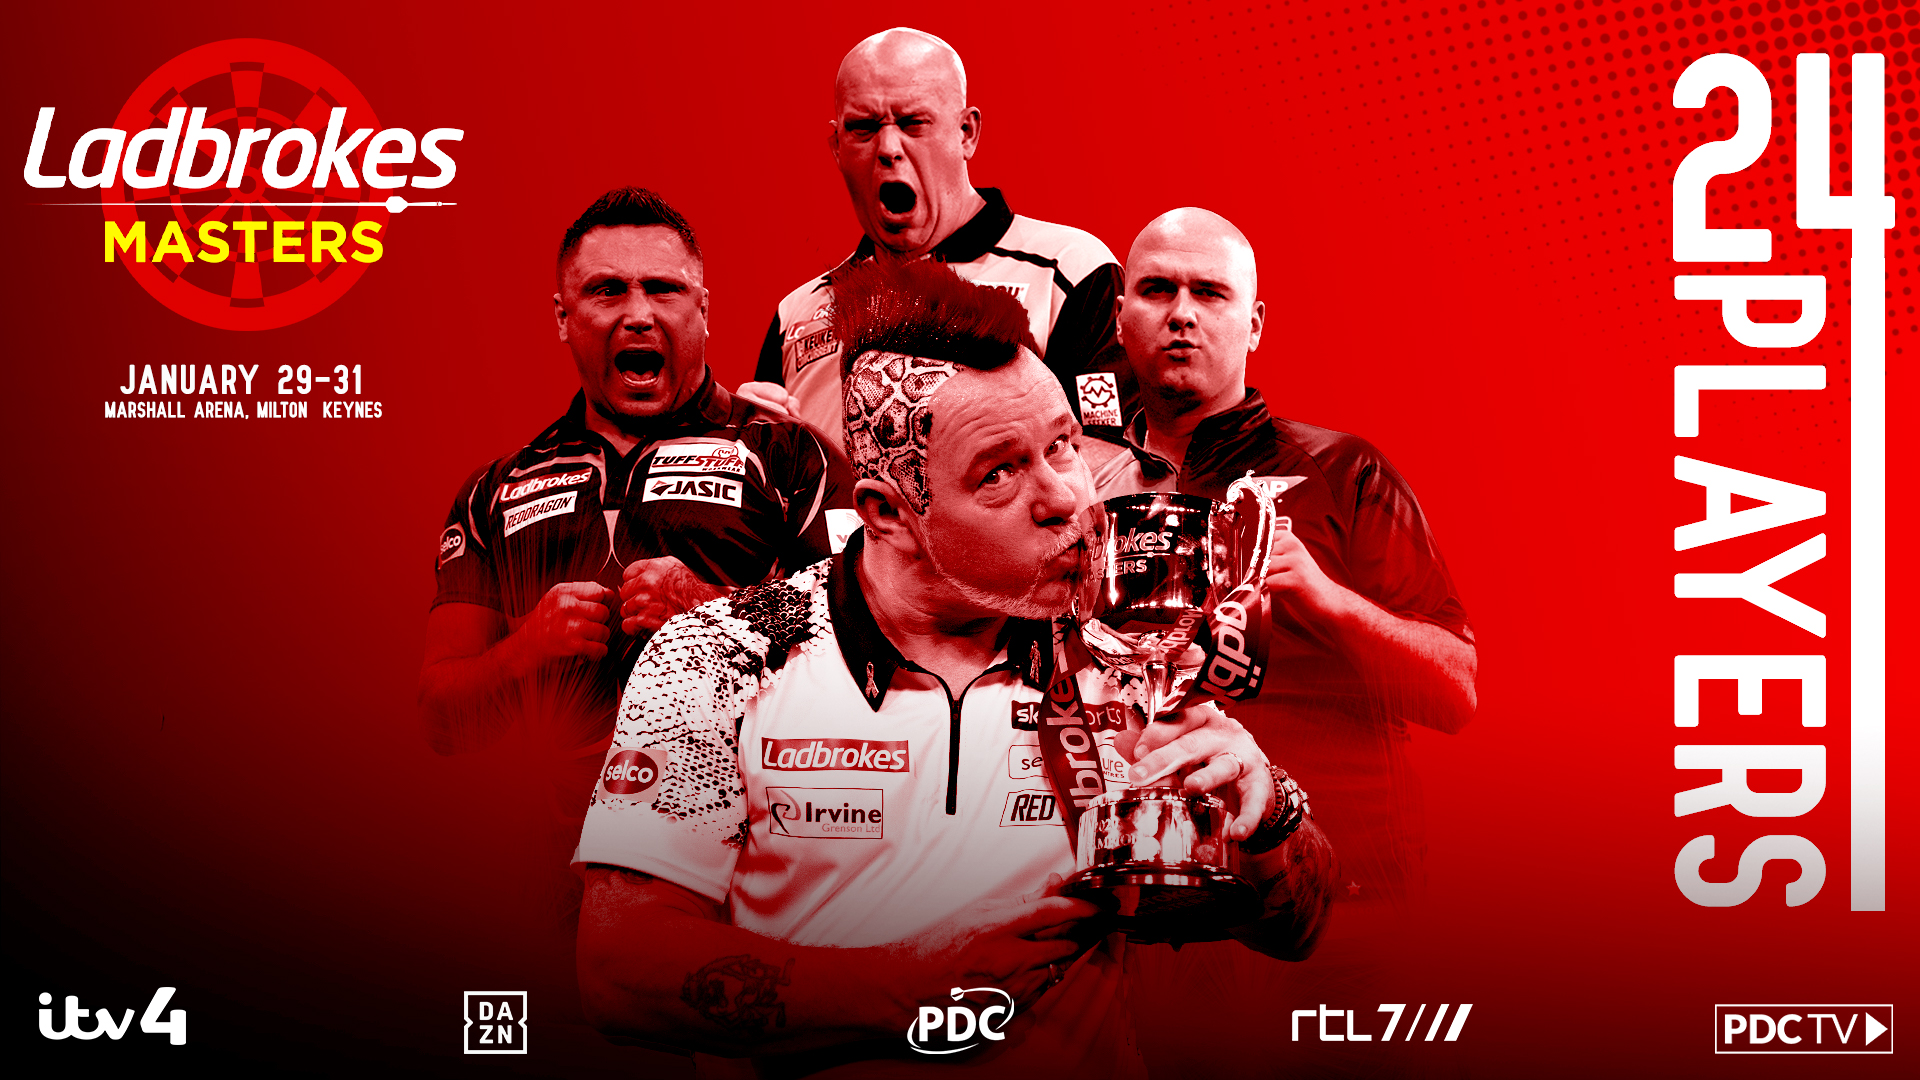 PDC Darts on "Here's how the Draw Bracket for the 2021 @Ladbrokes Masters shapes up... https://t.co/EgUo07I4aa" / Twitter